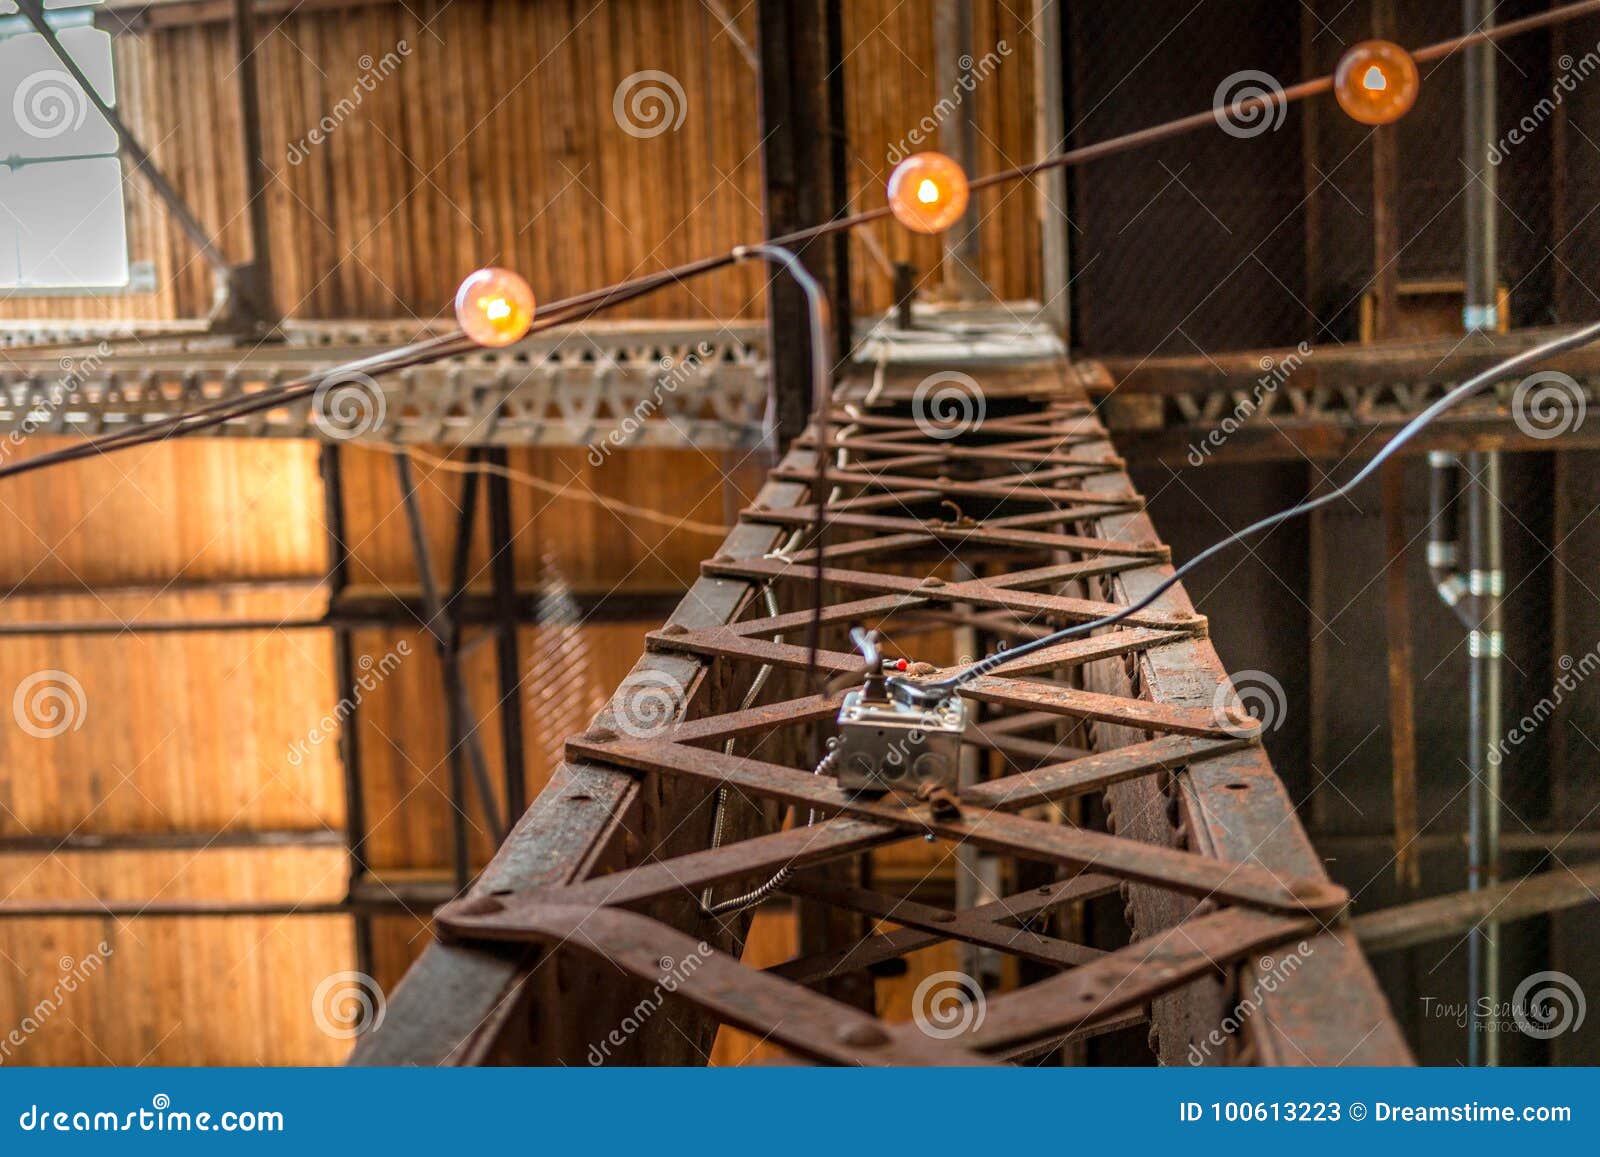 Architectural Steel Support Beam Stock Image Image Of